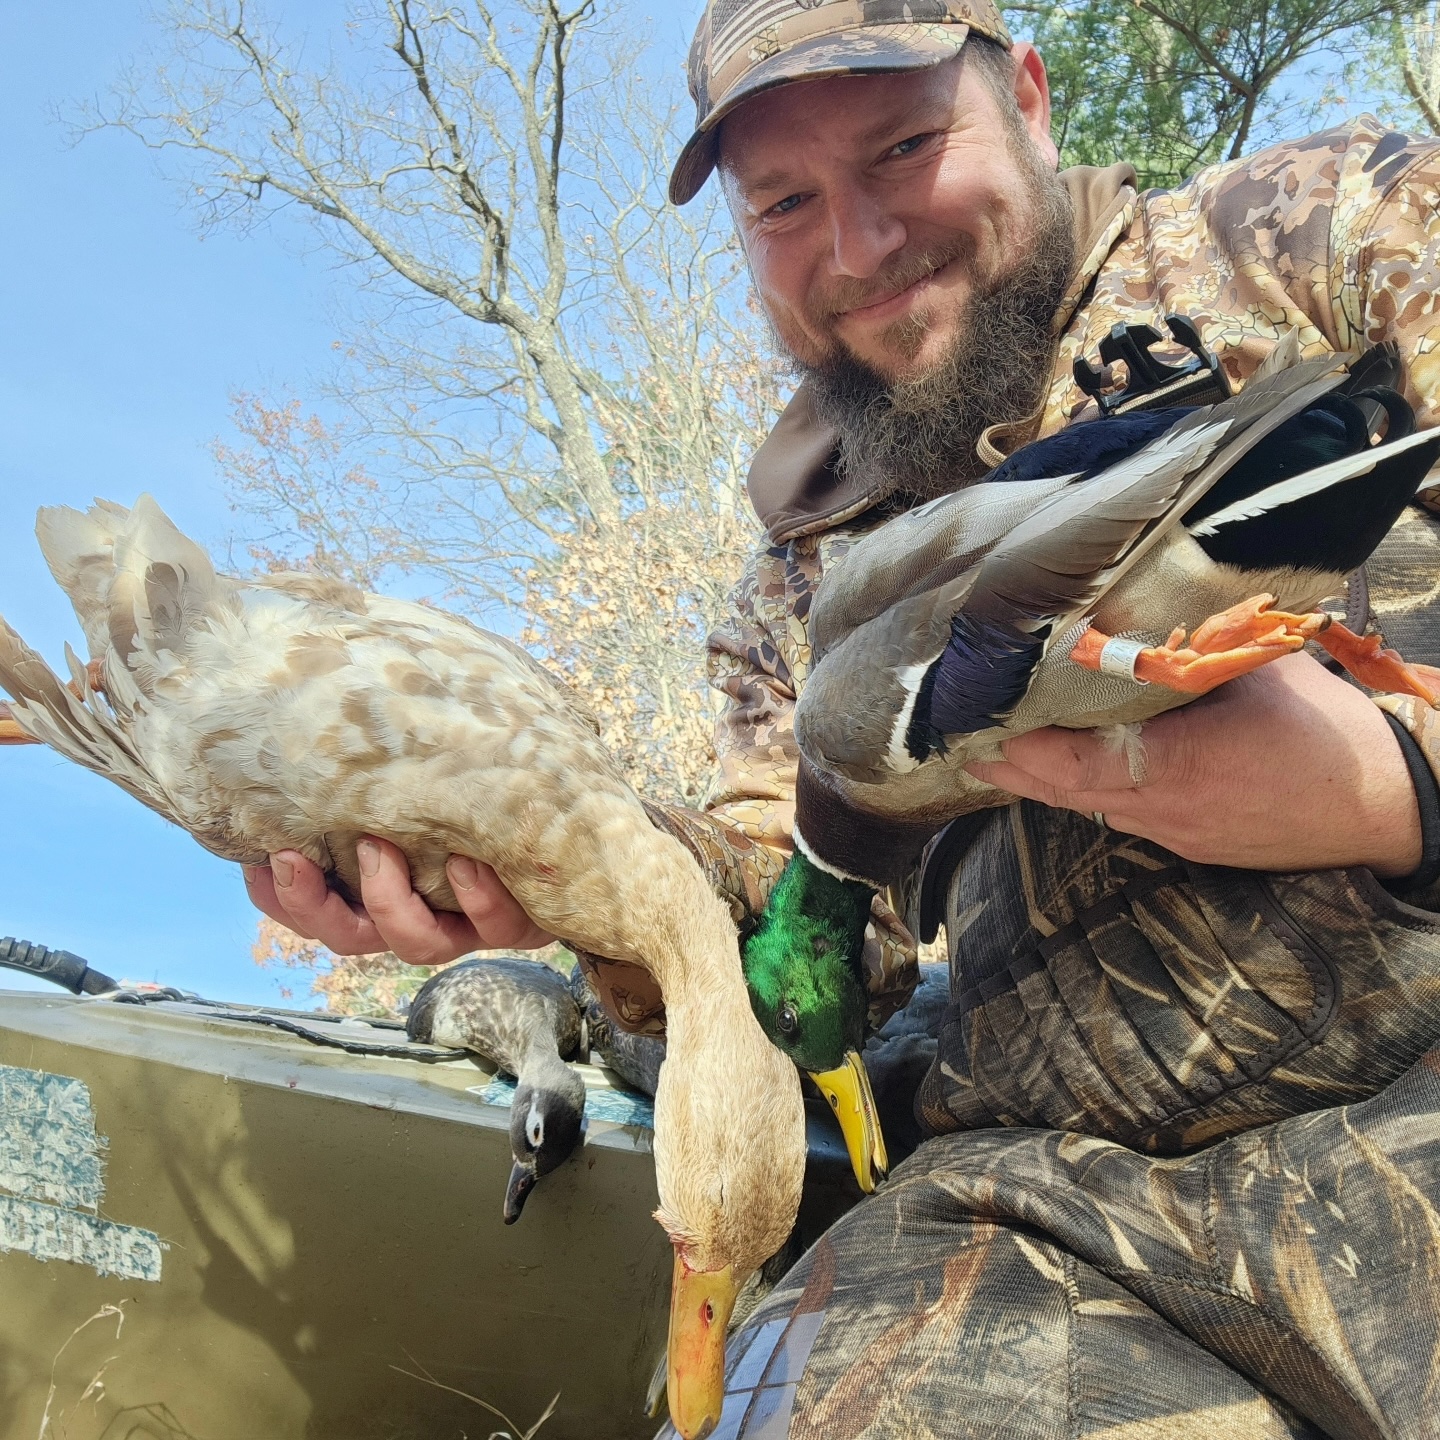 Mike Wec with two great ducks.